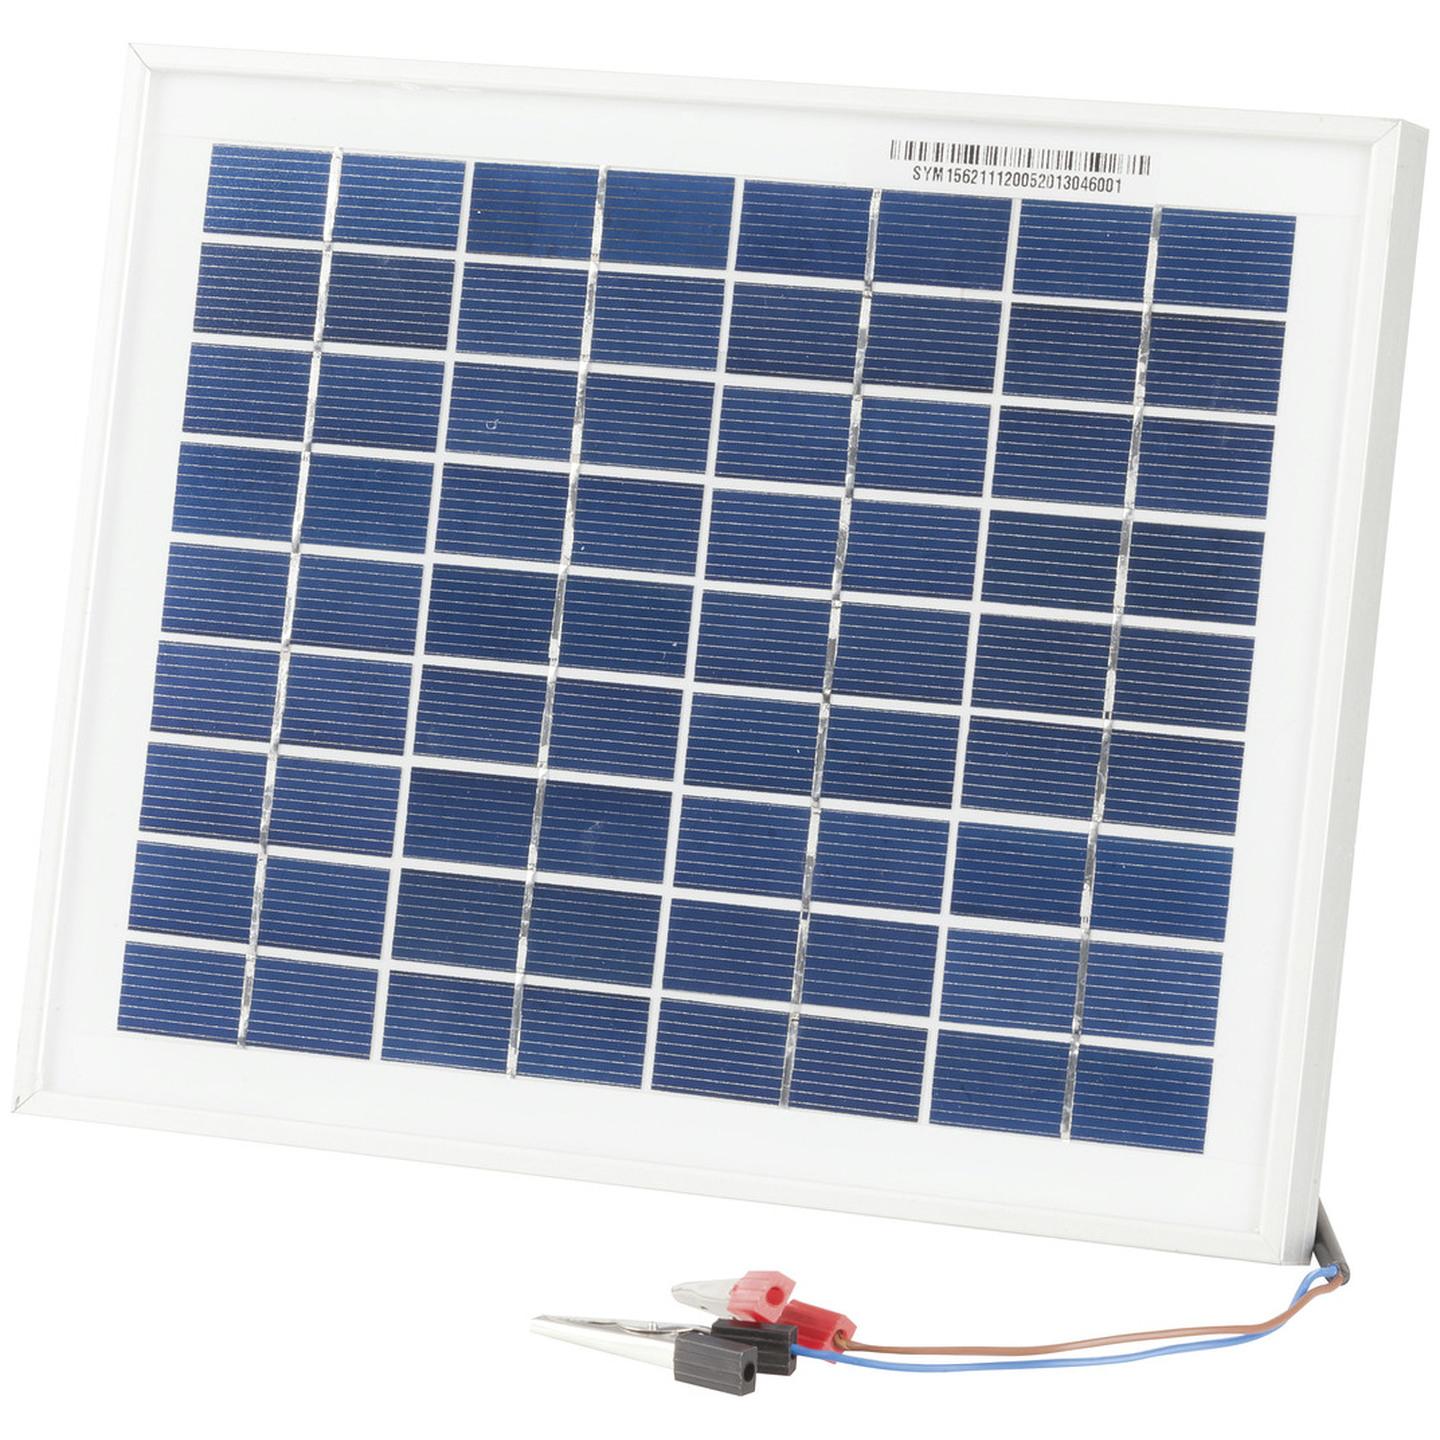 12V 5W Solar Panel with Lead/Clips